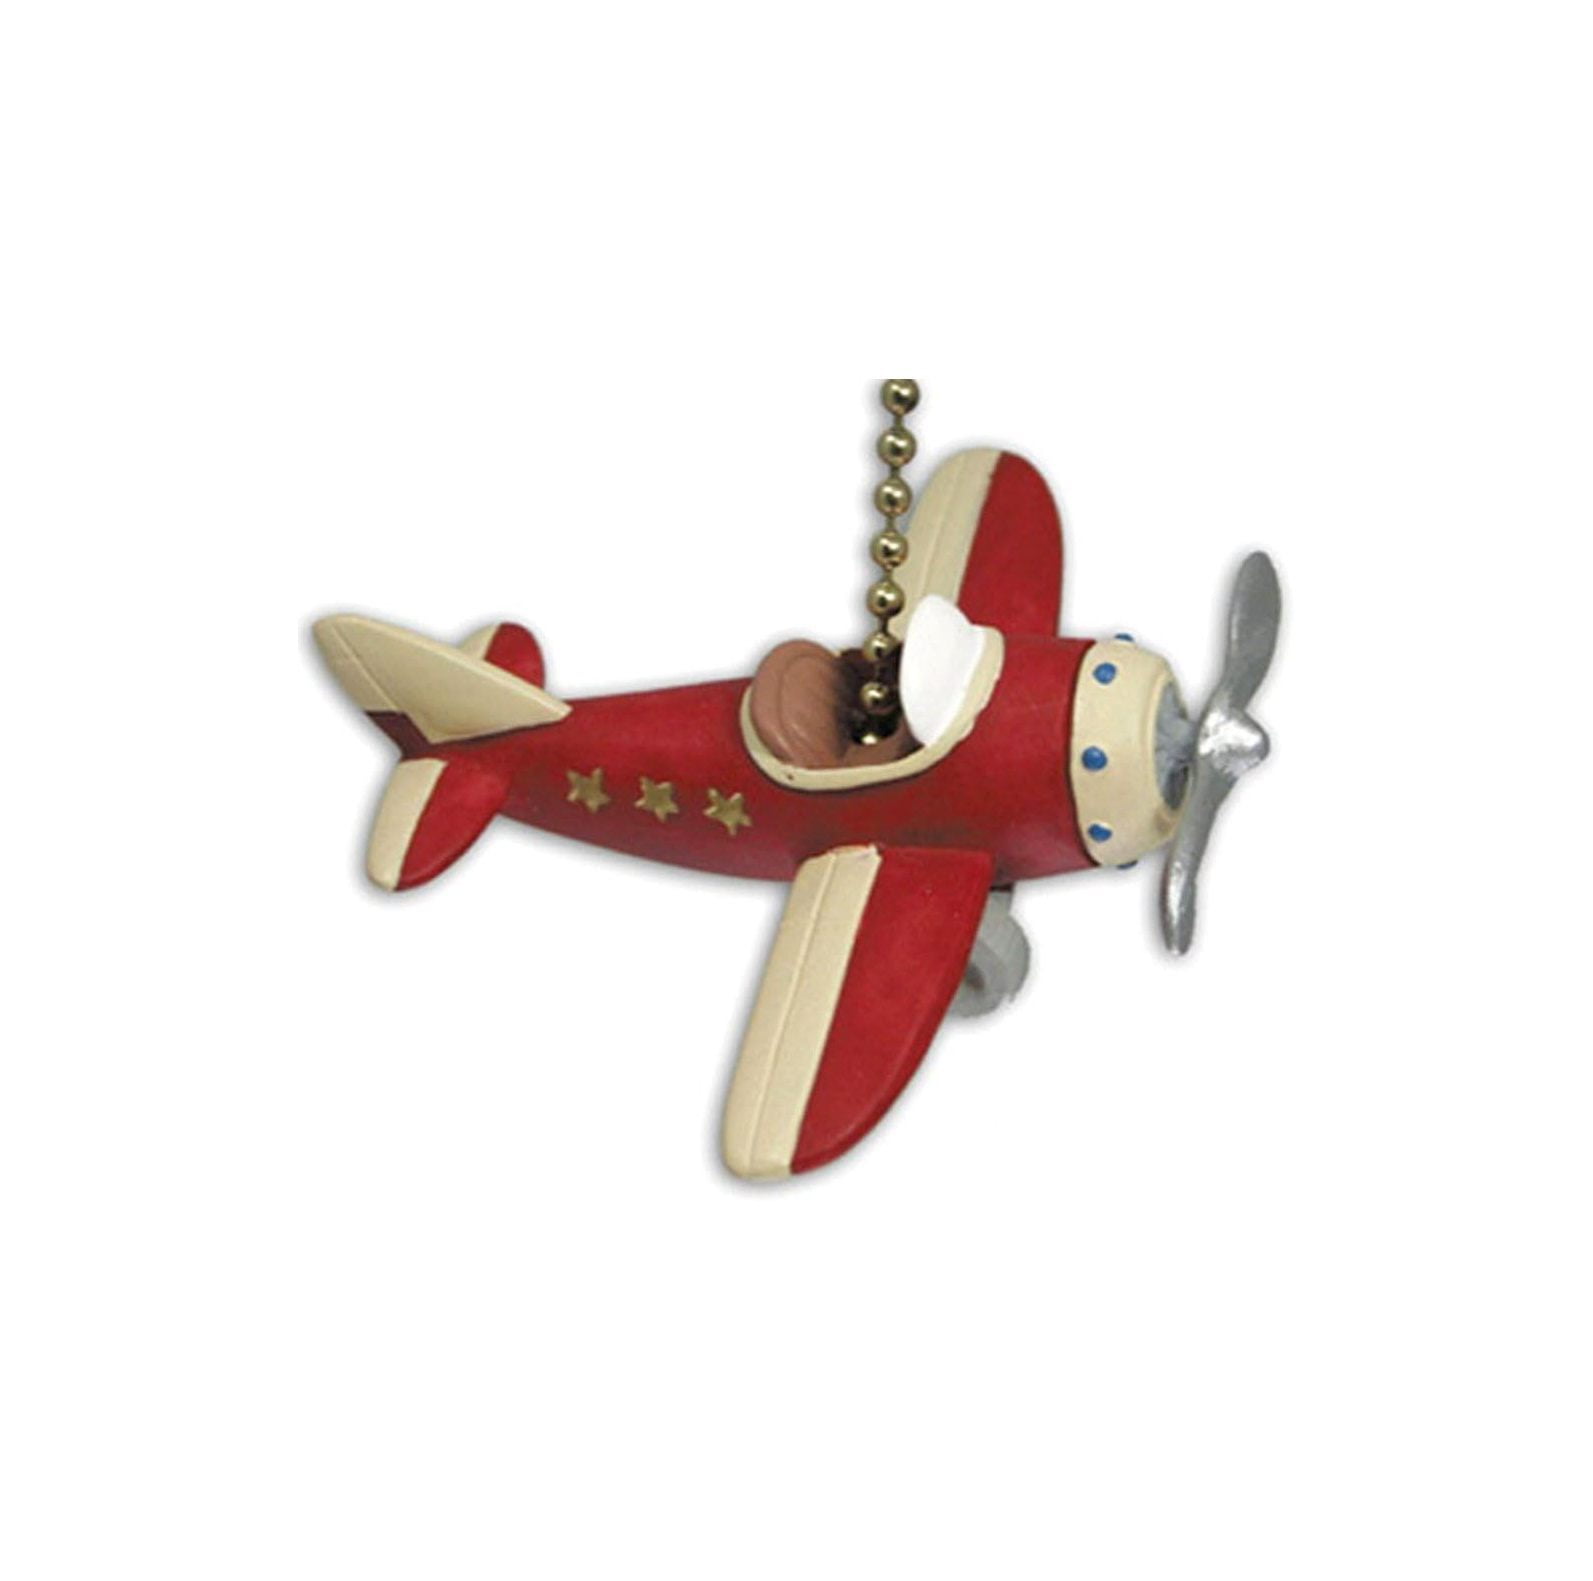 Red Plane Propeller Airplane Ceiling